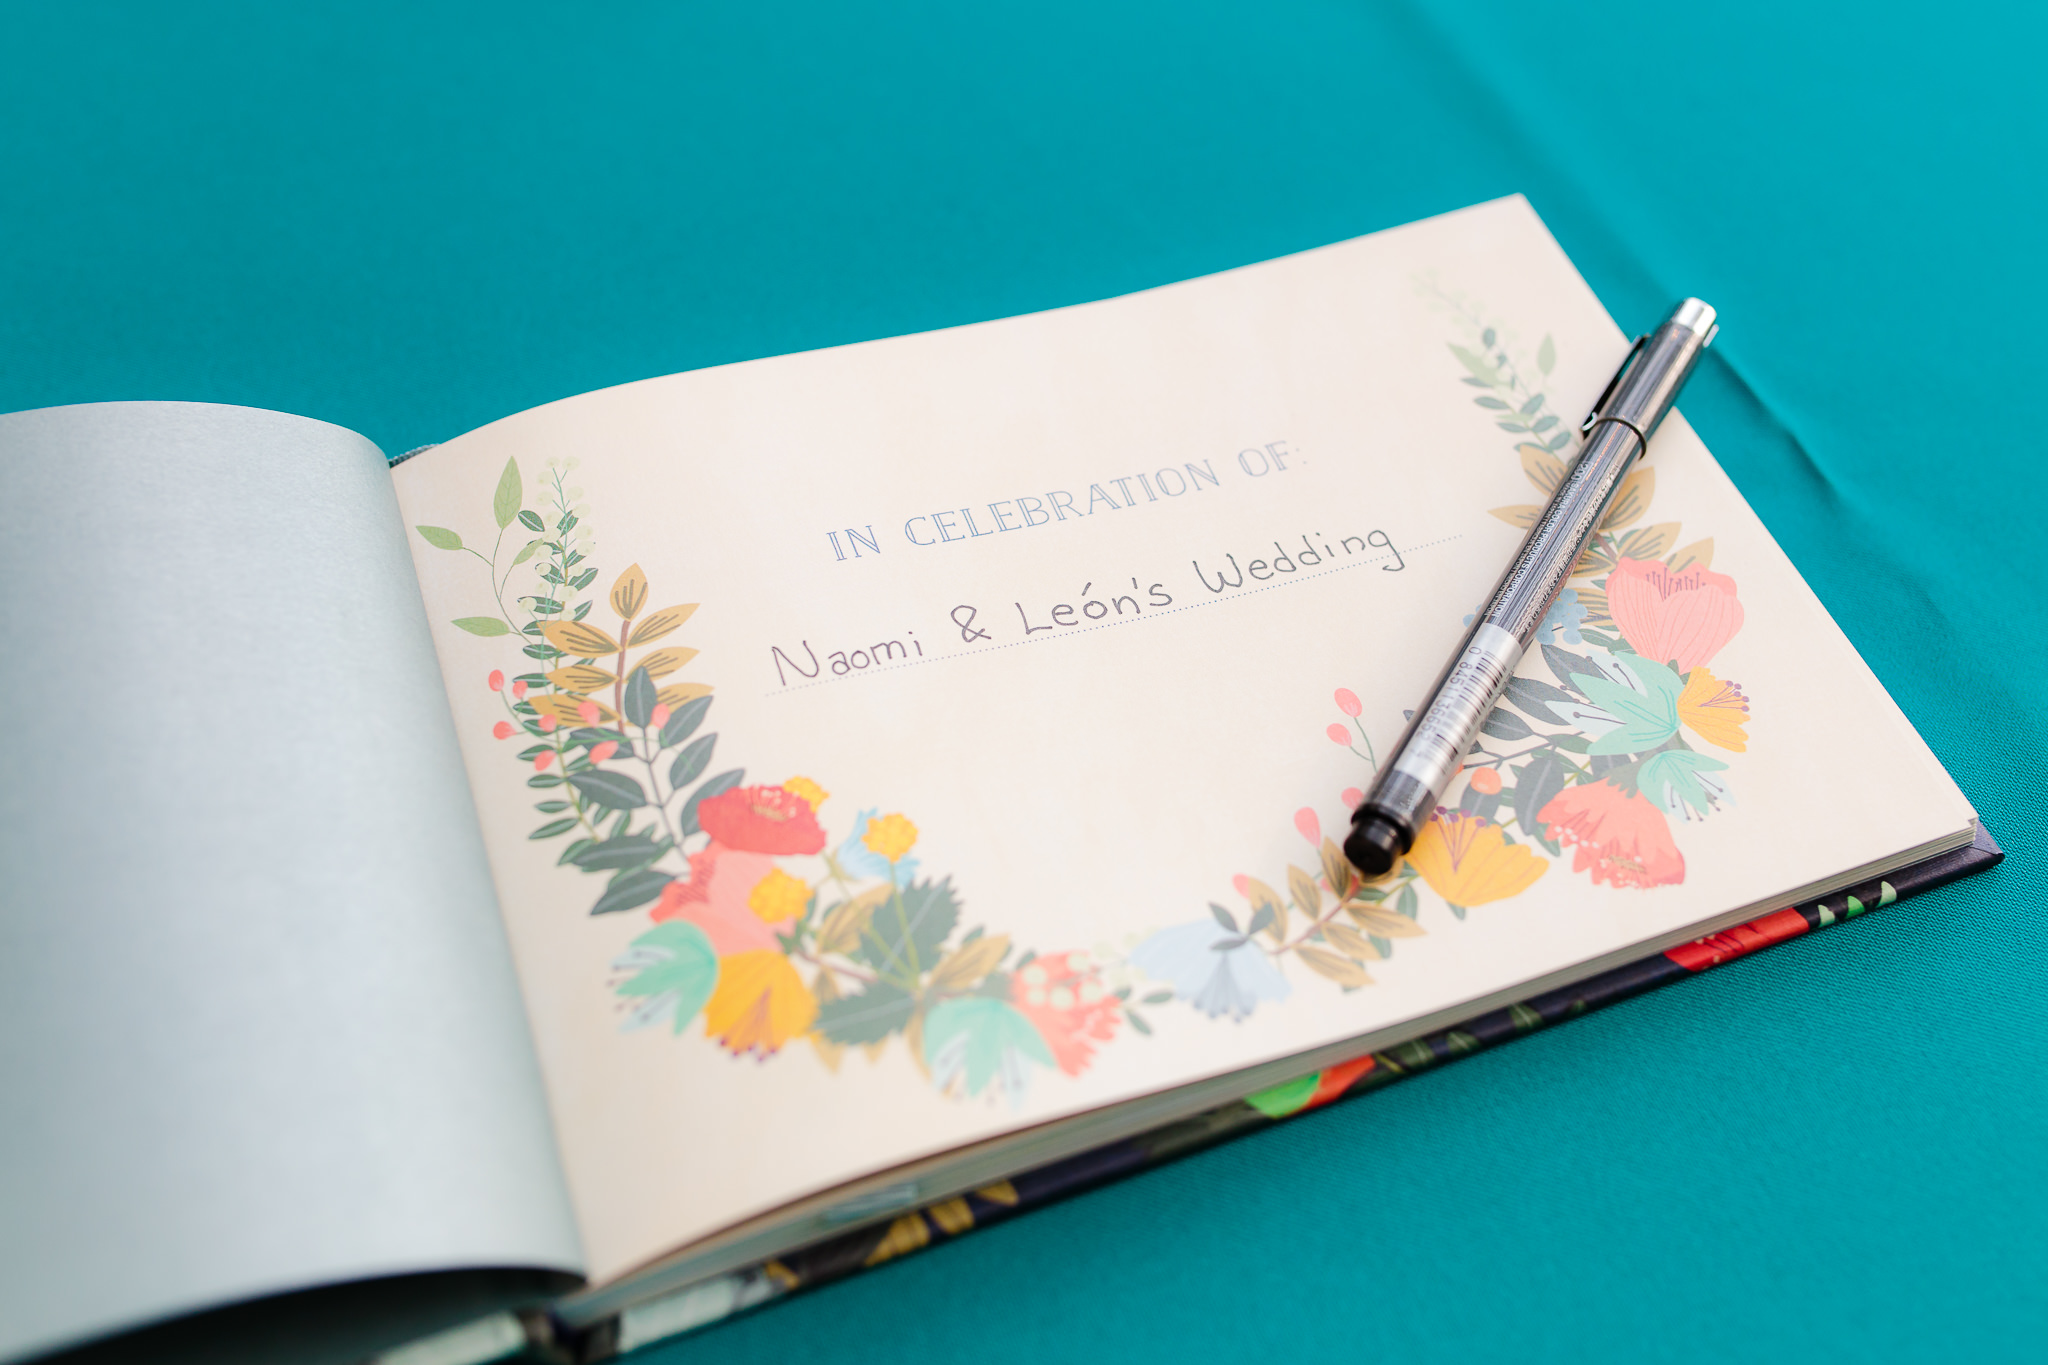 Guestbook with floral designs sits on a teal table cloth waiting to be signed at Phipps Conservatory